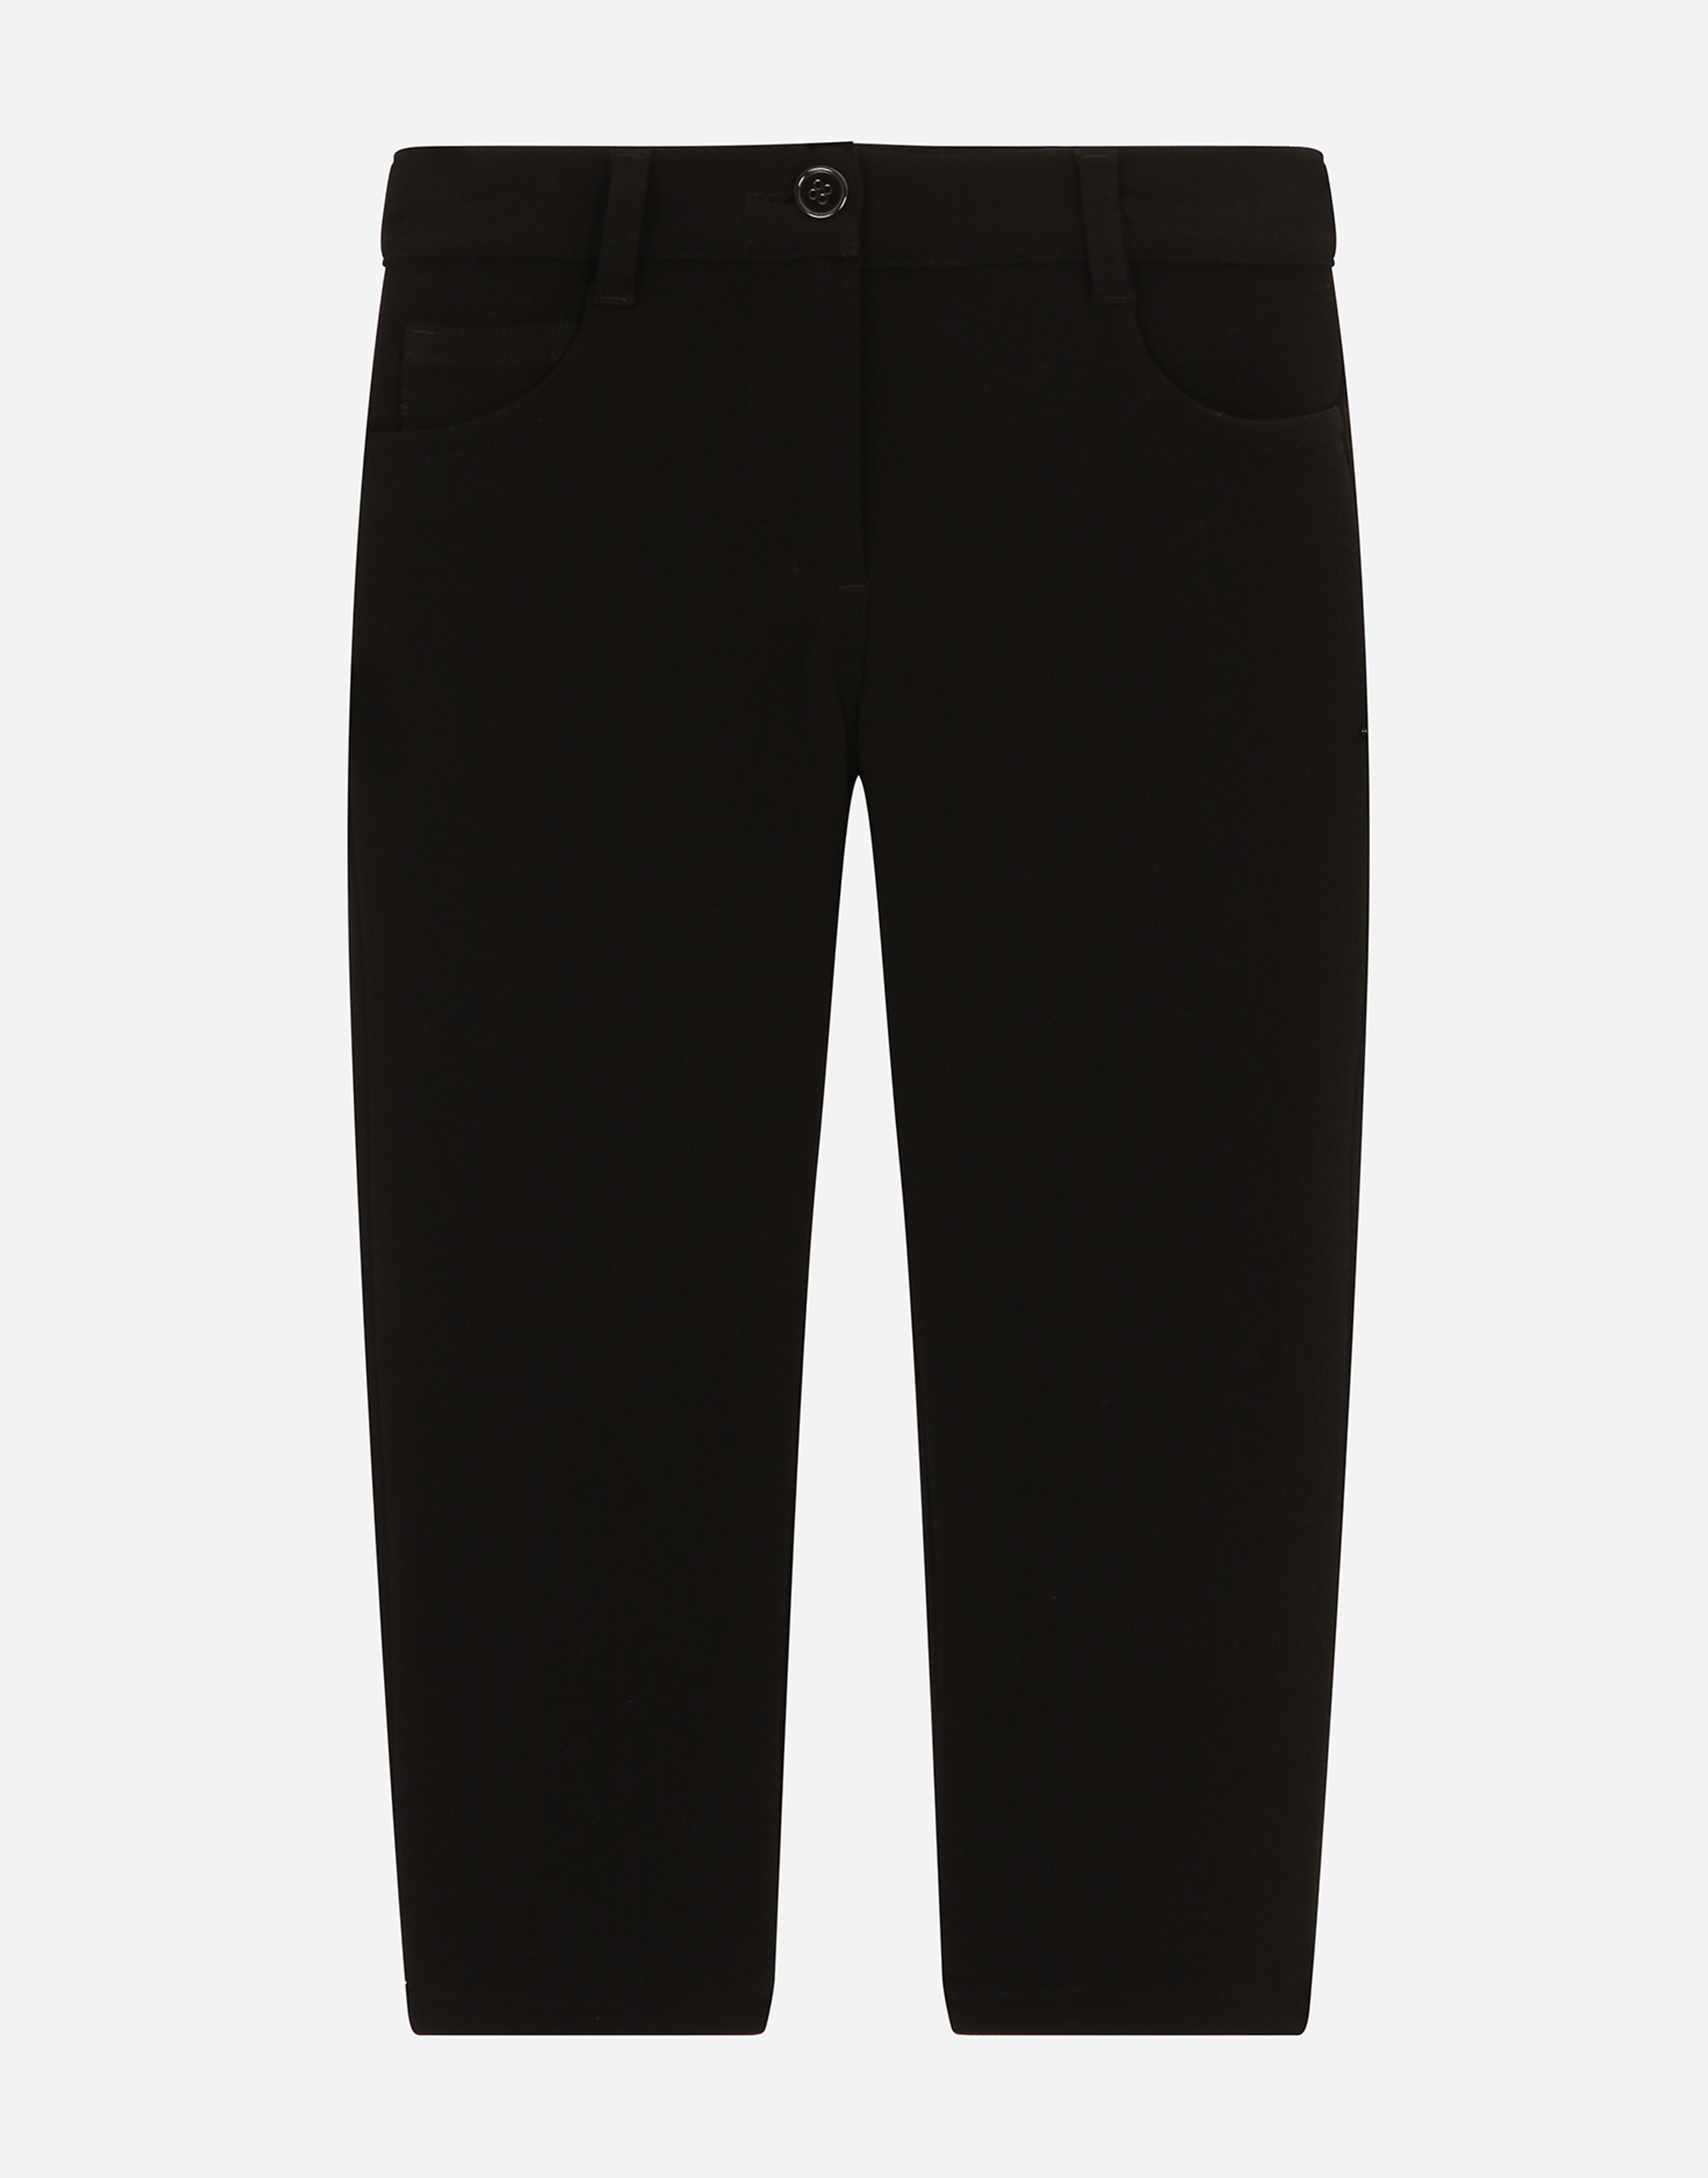 Stretch cady pants in Black